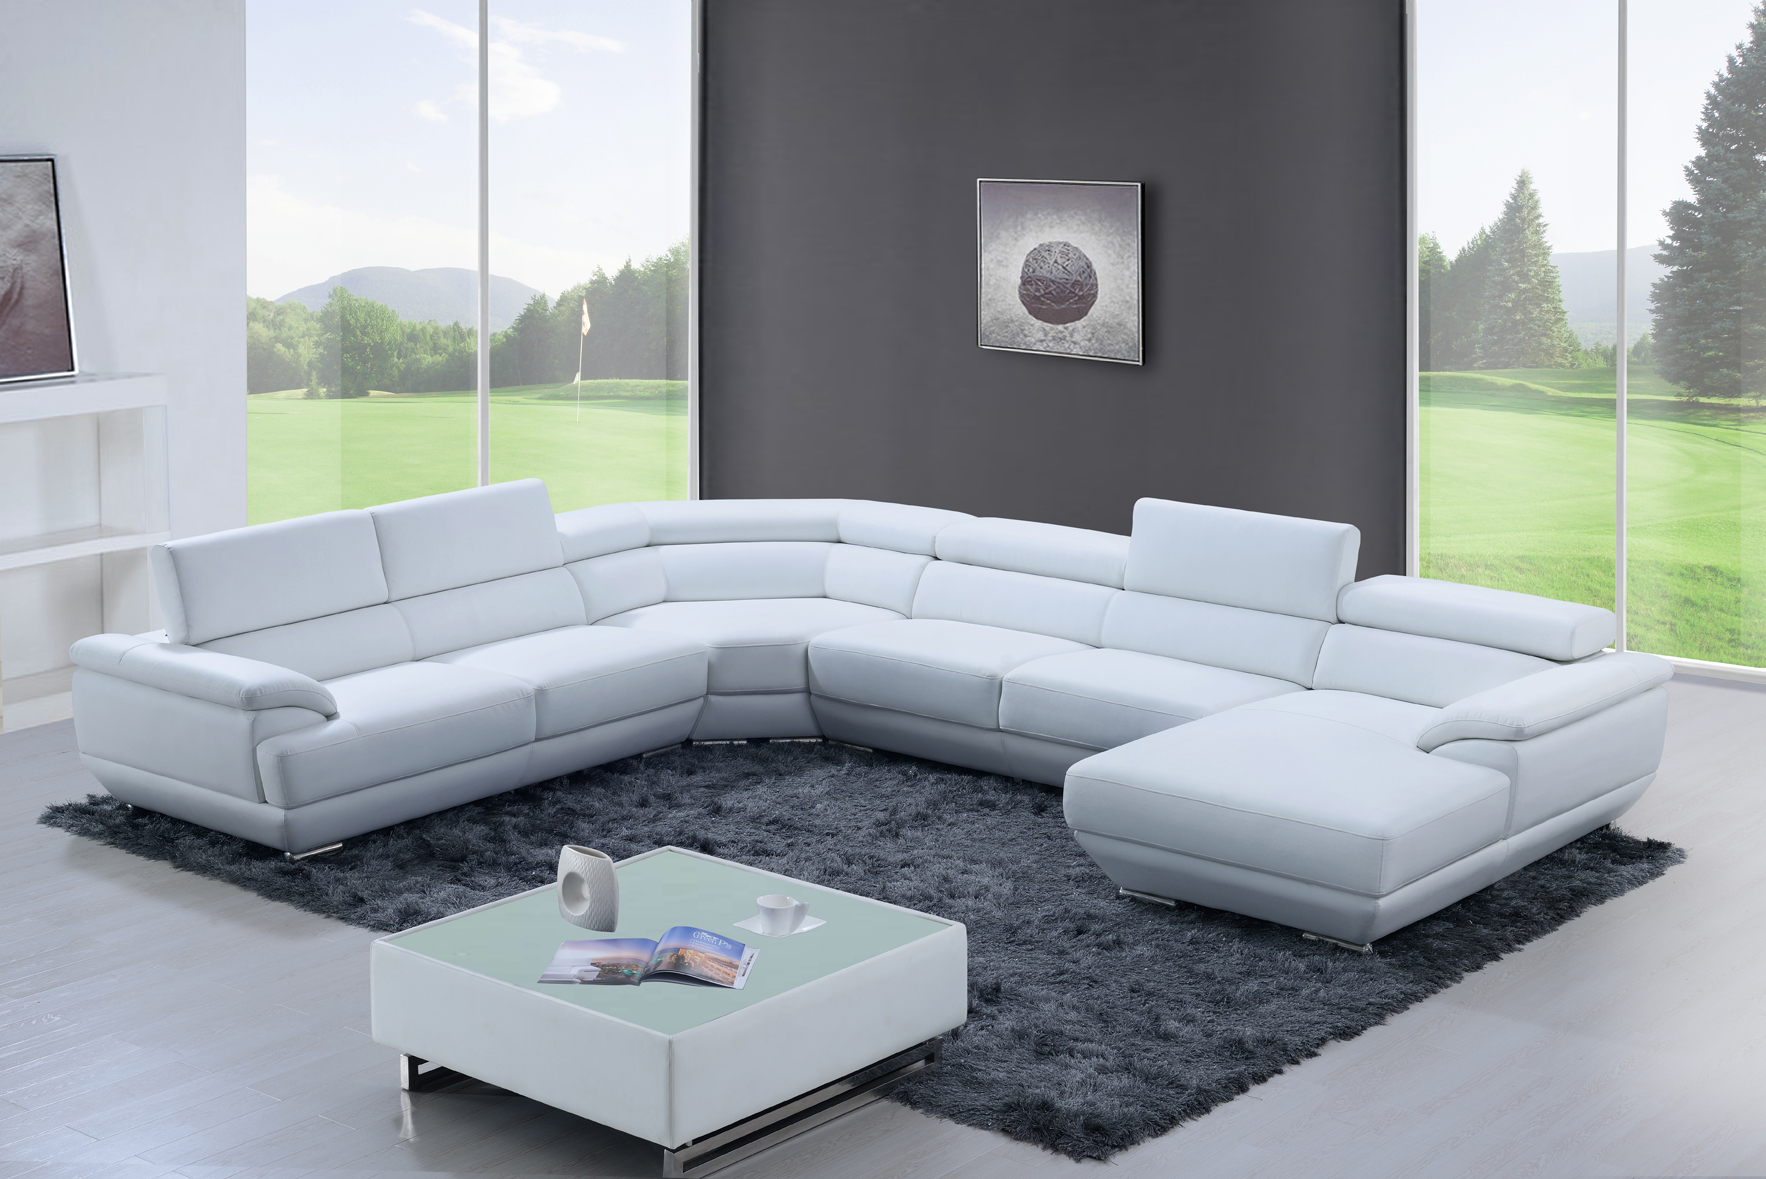 Living Room Furniture Sleepers Sofas Loveseats and Chairs 430 Sectional Pure White